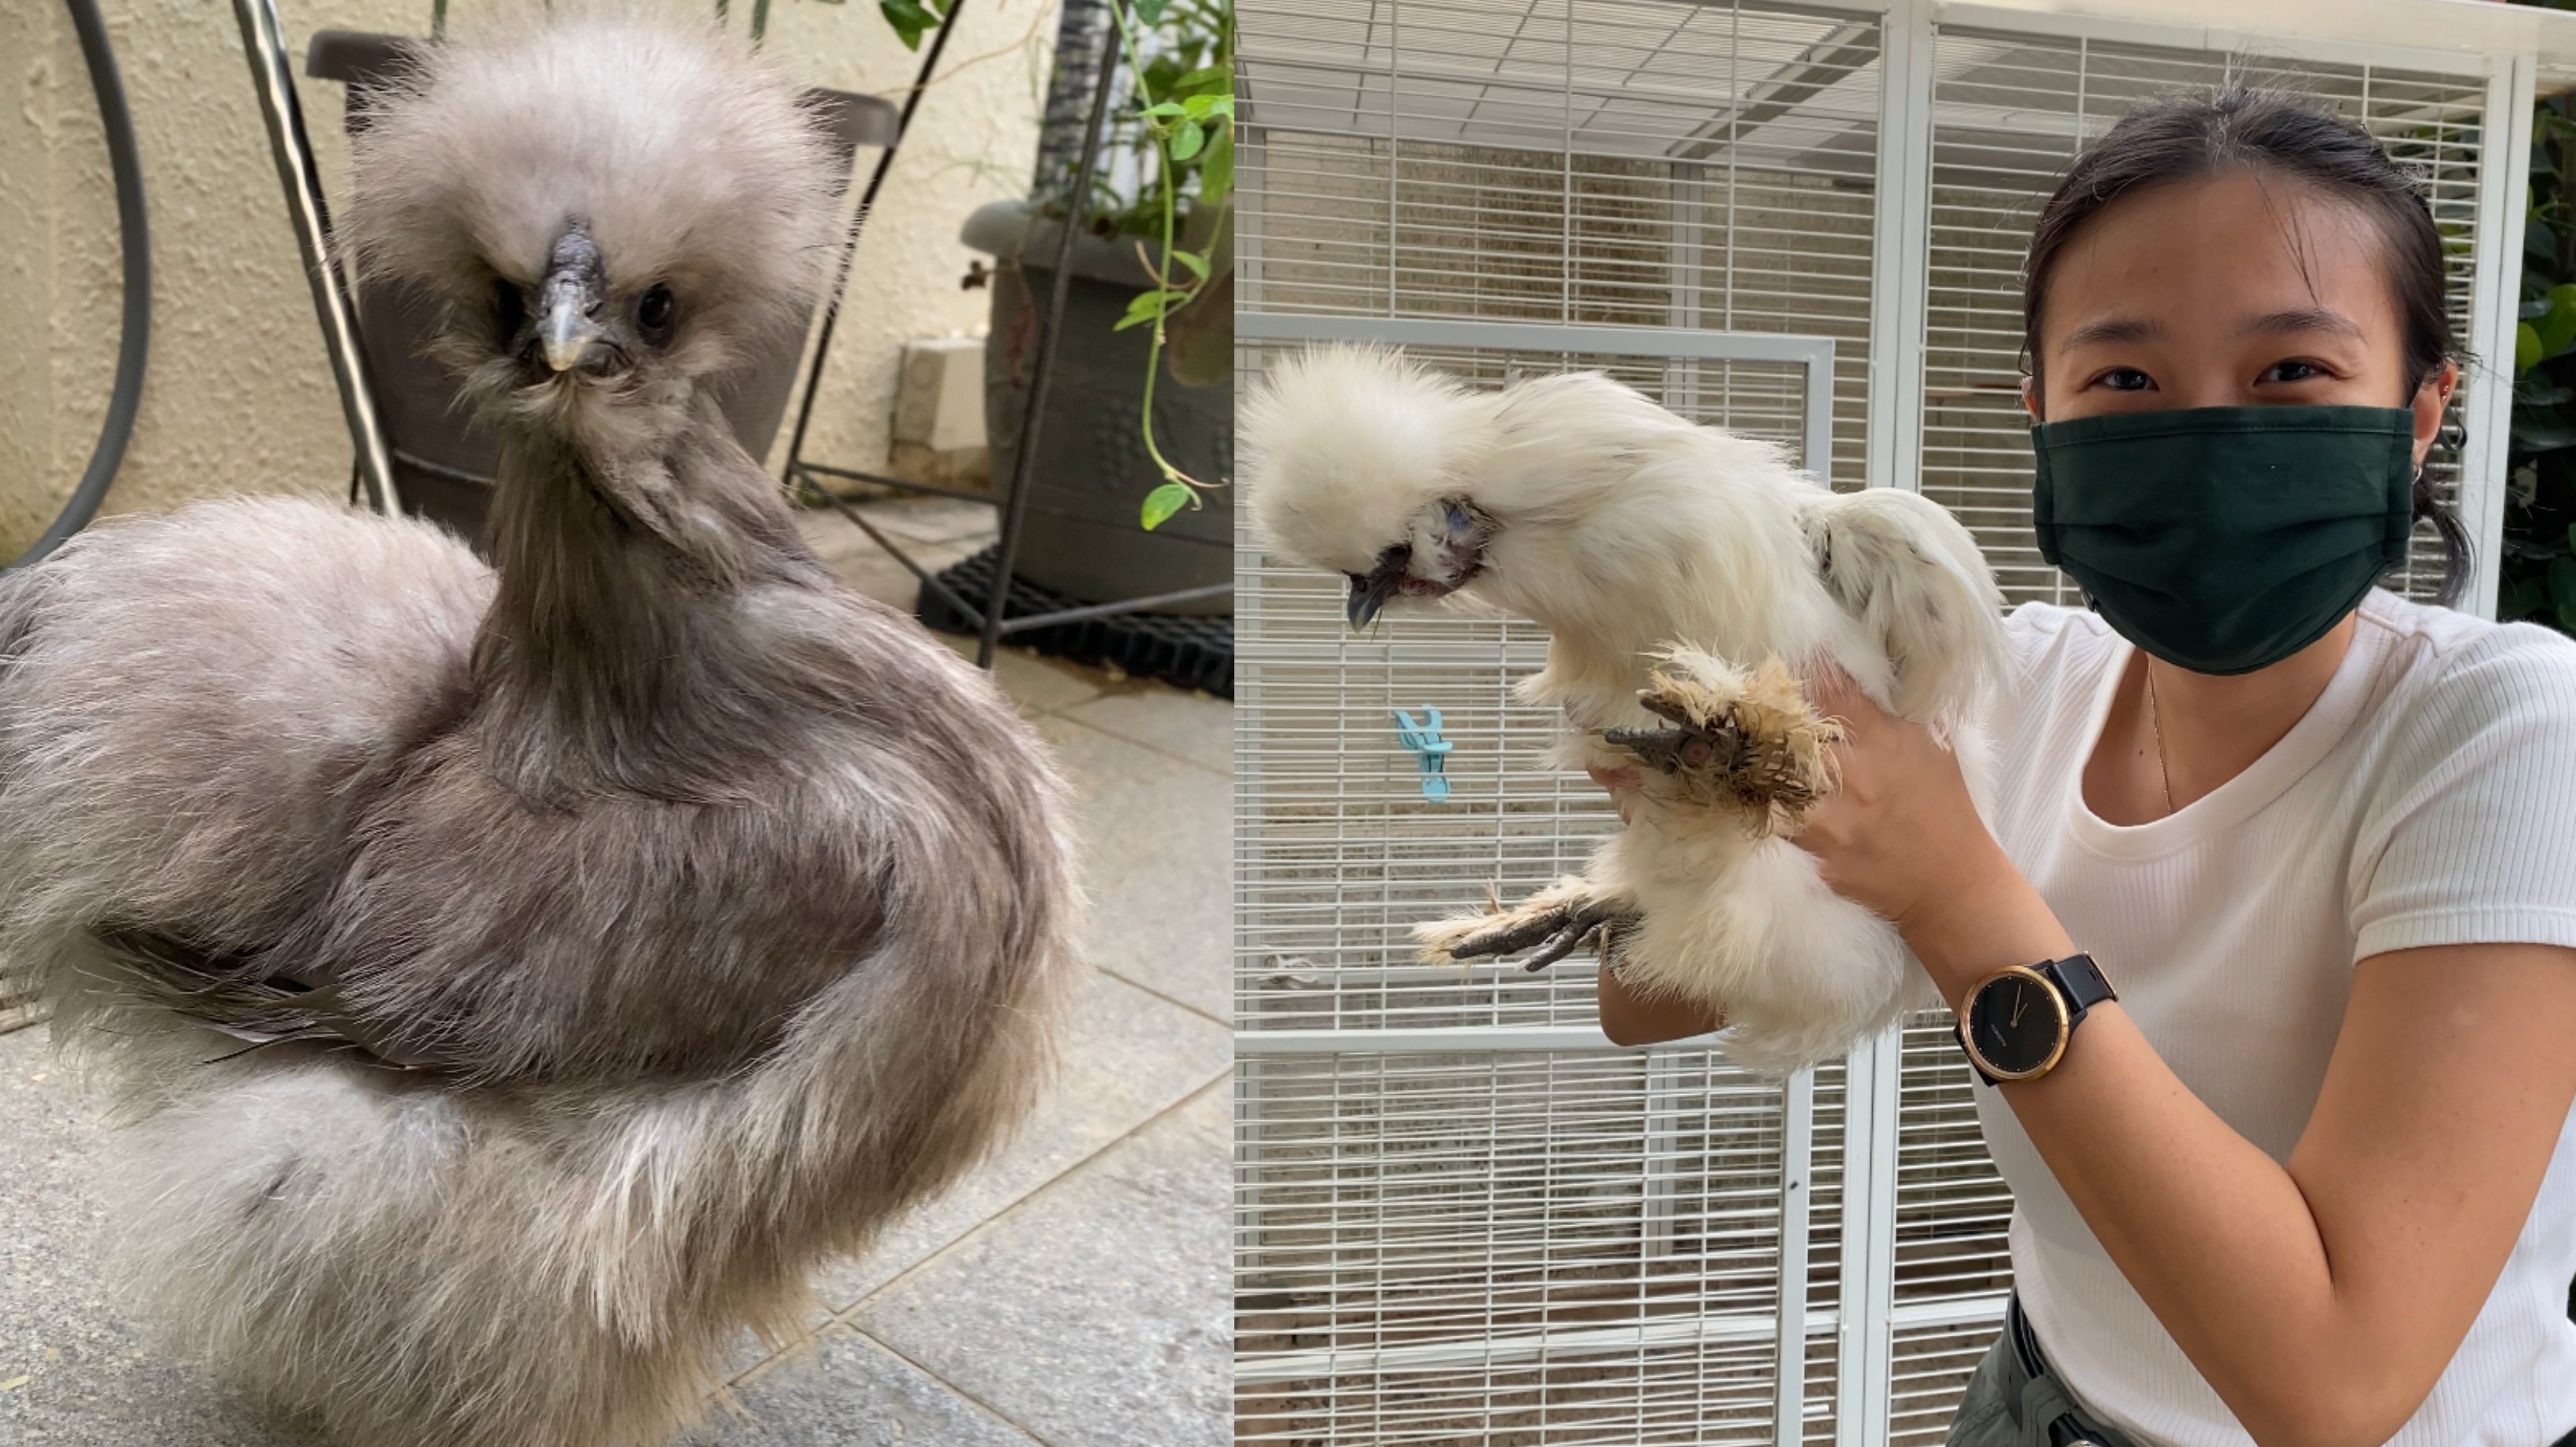 This Fluffy Chicken Is a New Pet Obsession. We Figure Out Why.